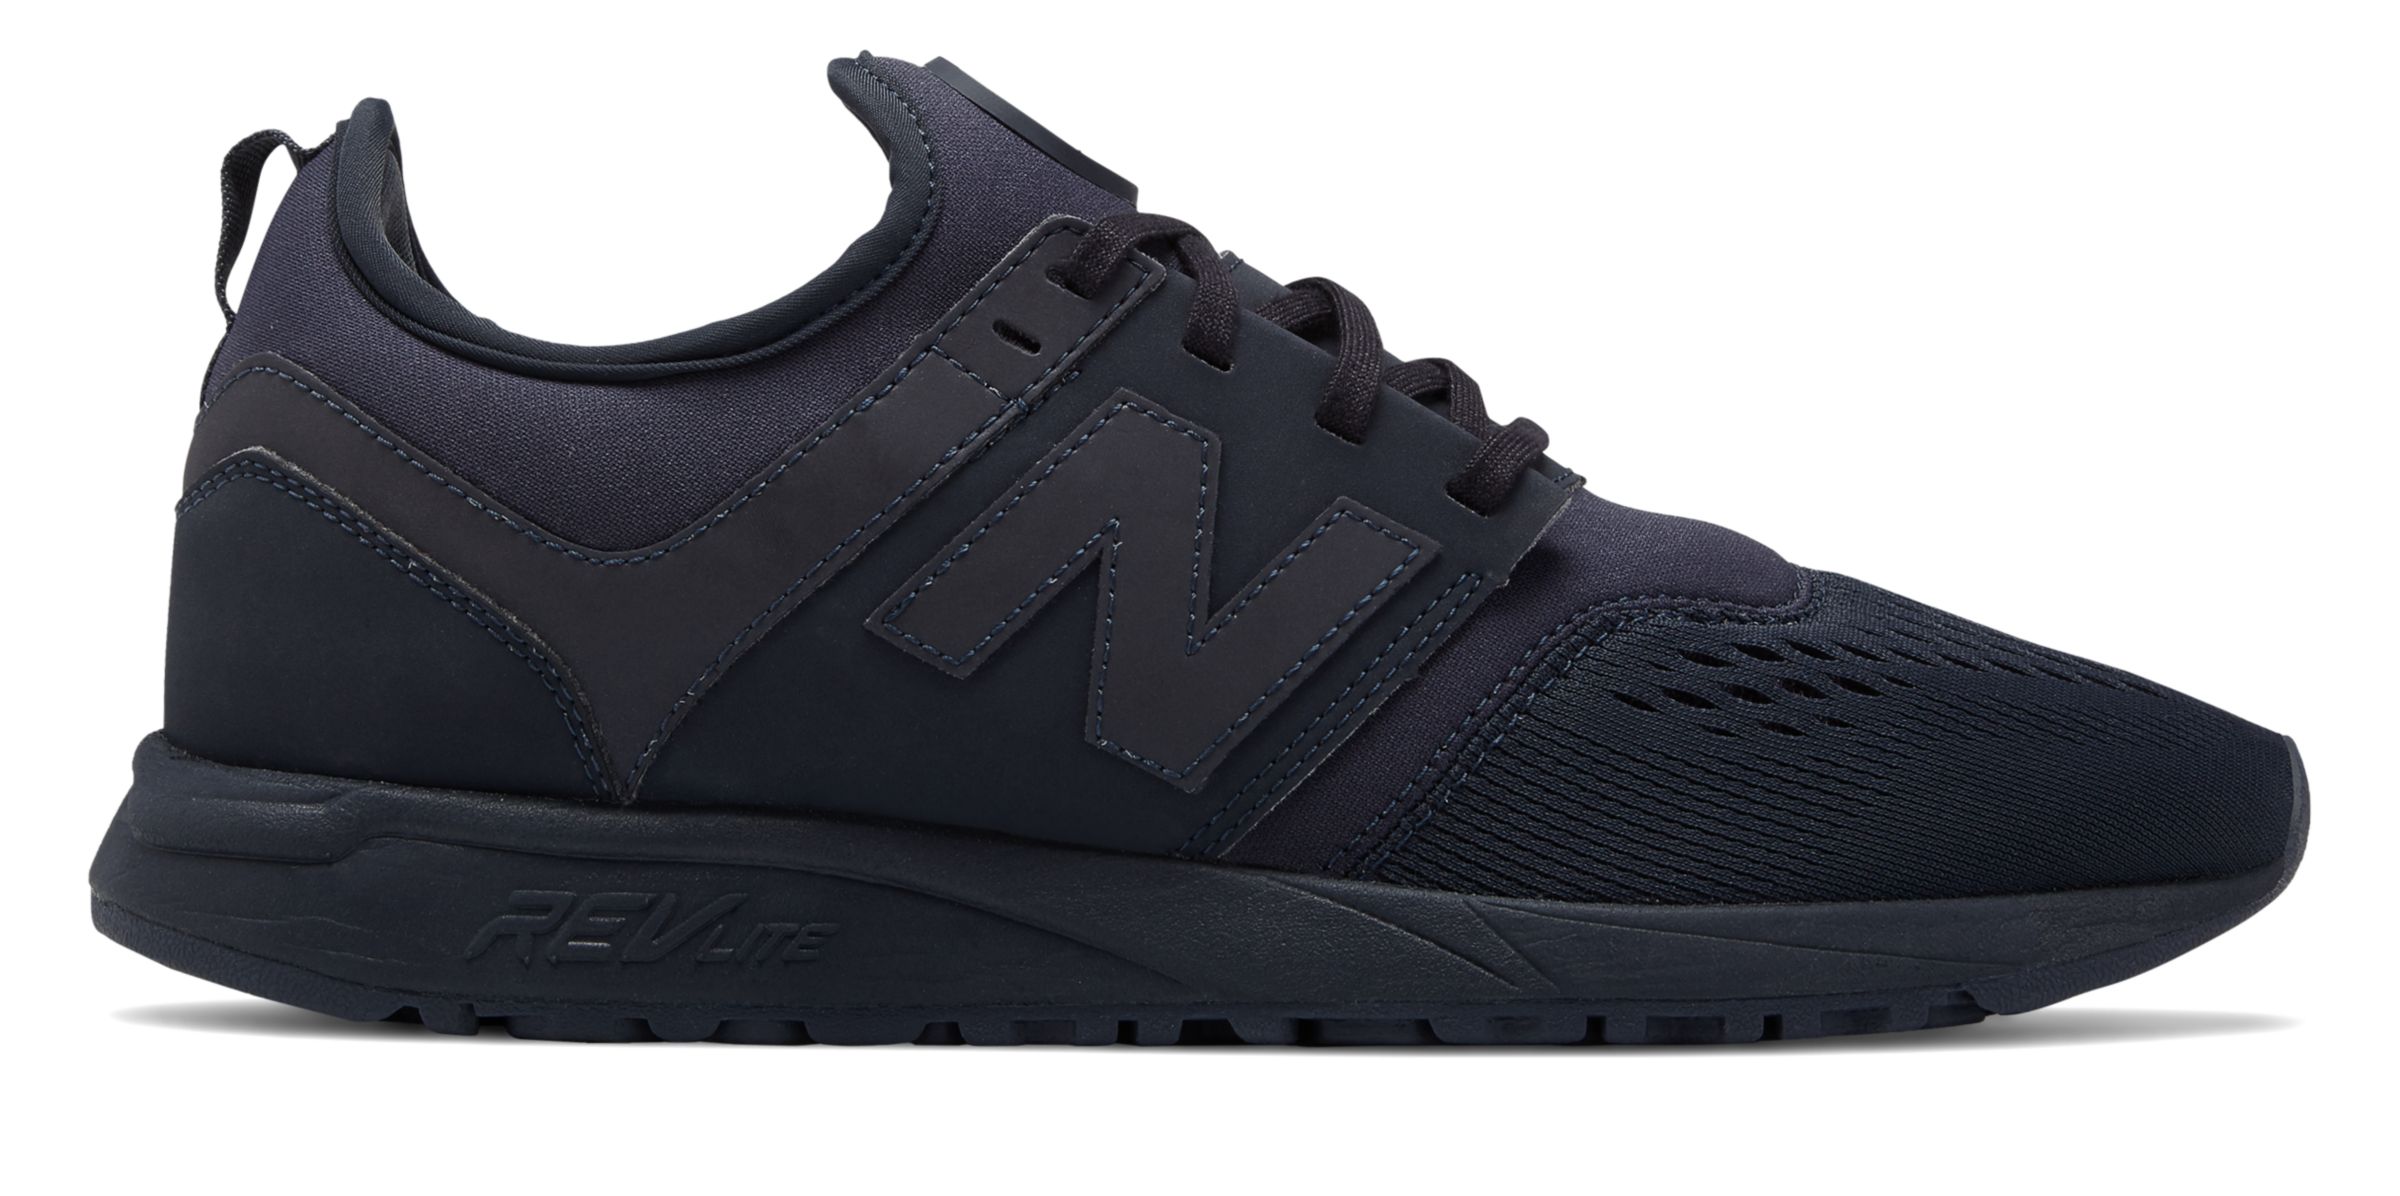 New Balance MRL247-ML on Sale - Discounts Up to 54% Off on MRL247BO at  Joe's New Balance Outlet